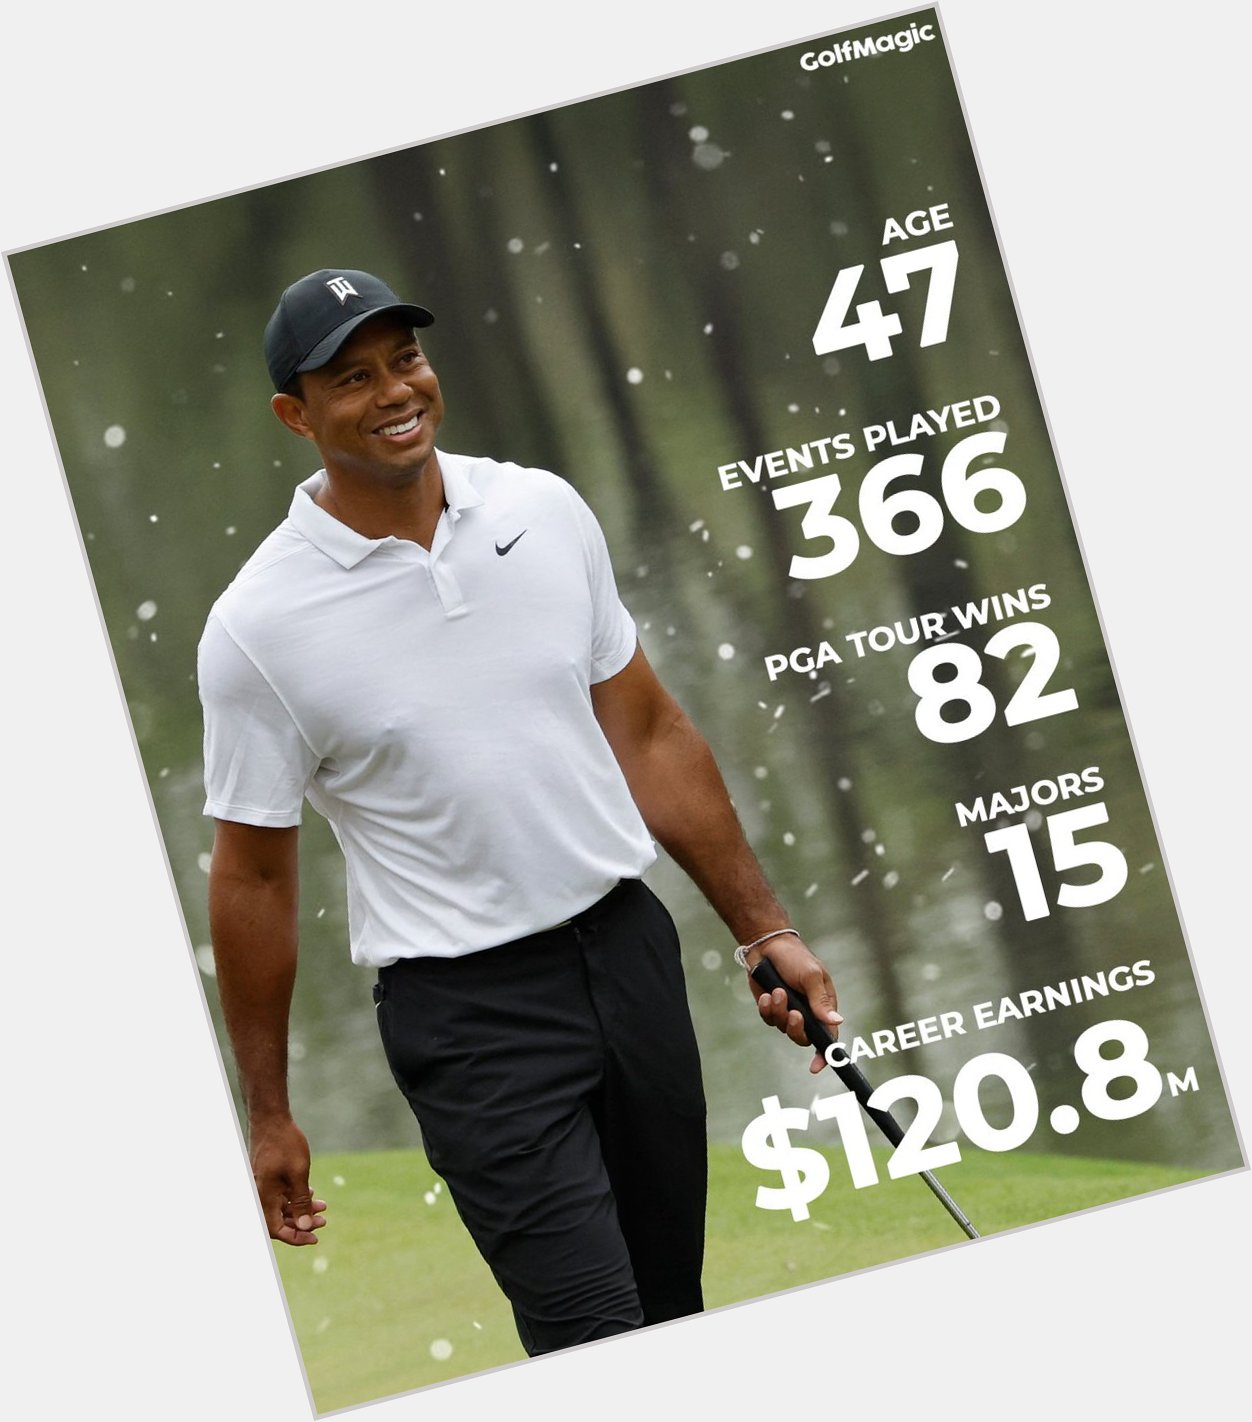 Happy Birthday to the G.O.A.T, Tiger Woods! 